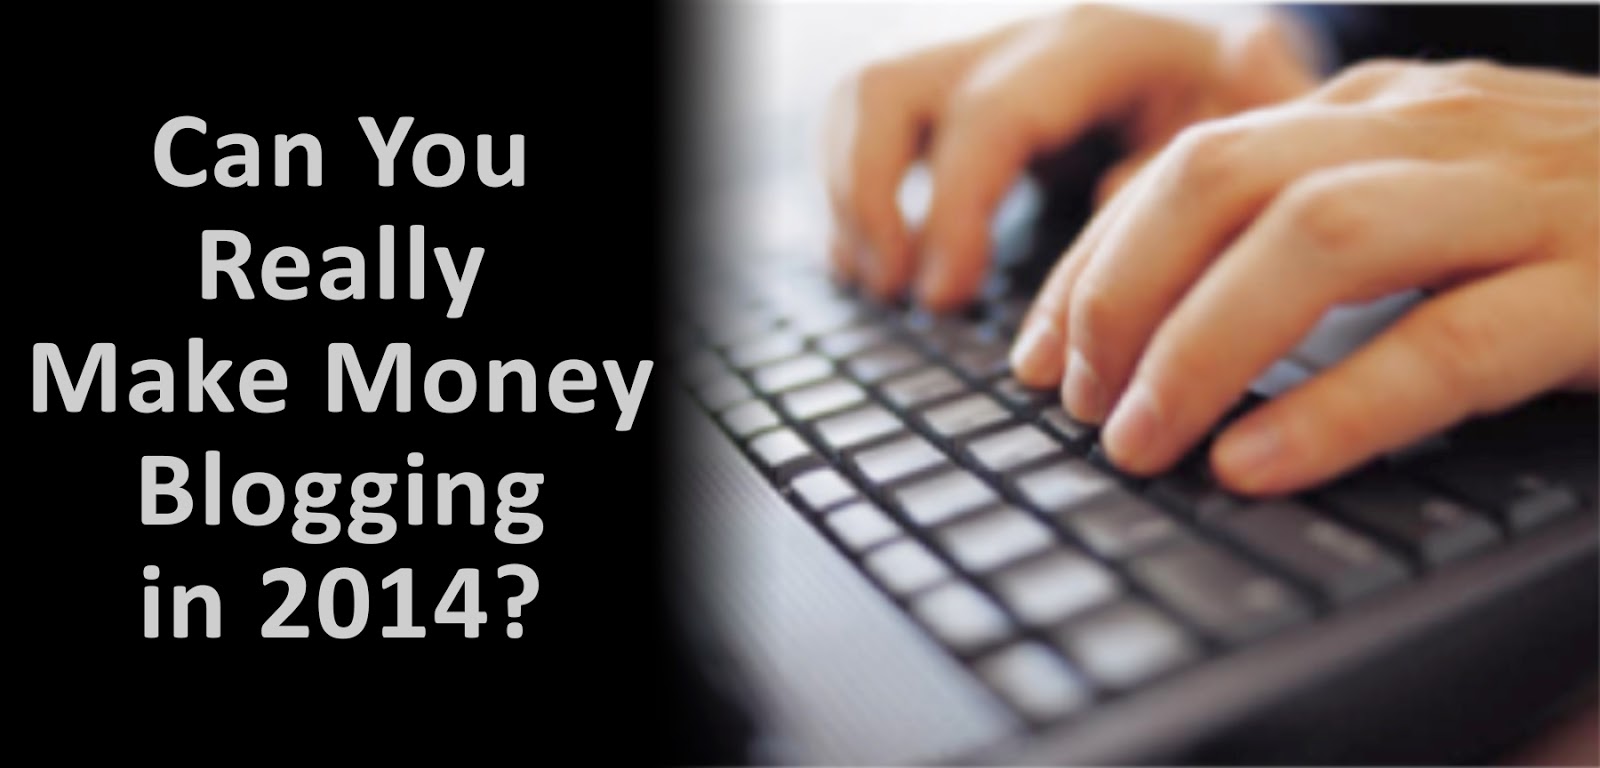 Can You Really Make Money Blogging in 2014?